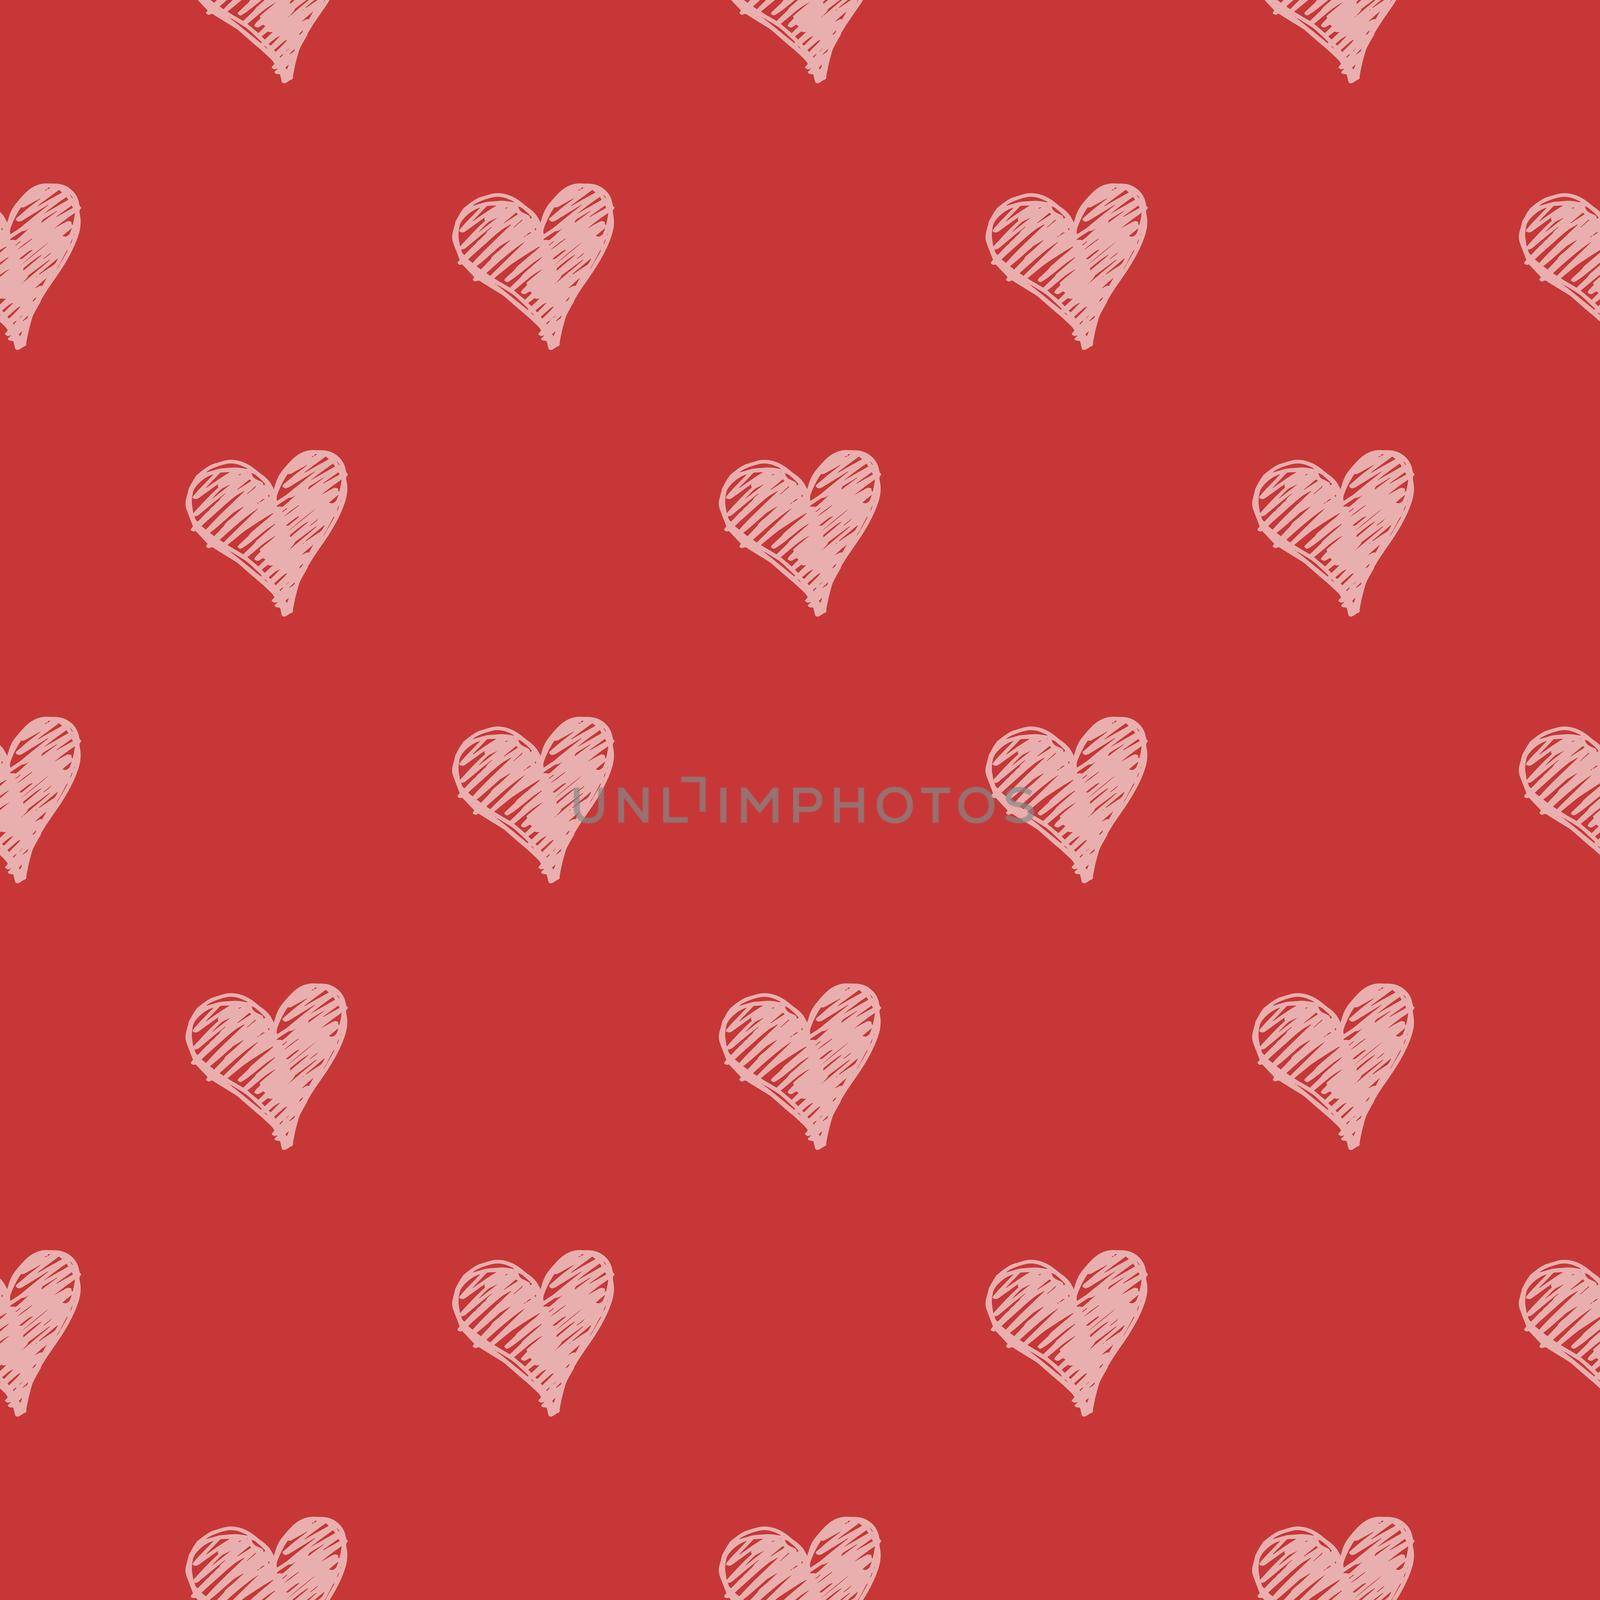 Heart shaped Seamless pattern for valentine's day, mother's day celebrations. Love related items. Home decoration printable. Design element, invitation, celebration related printable card by mrceviz